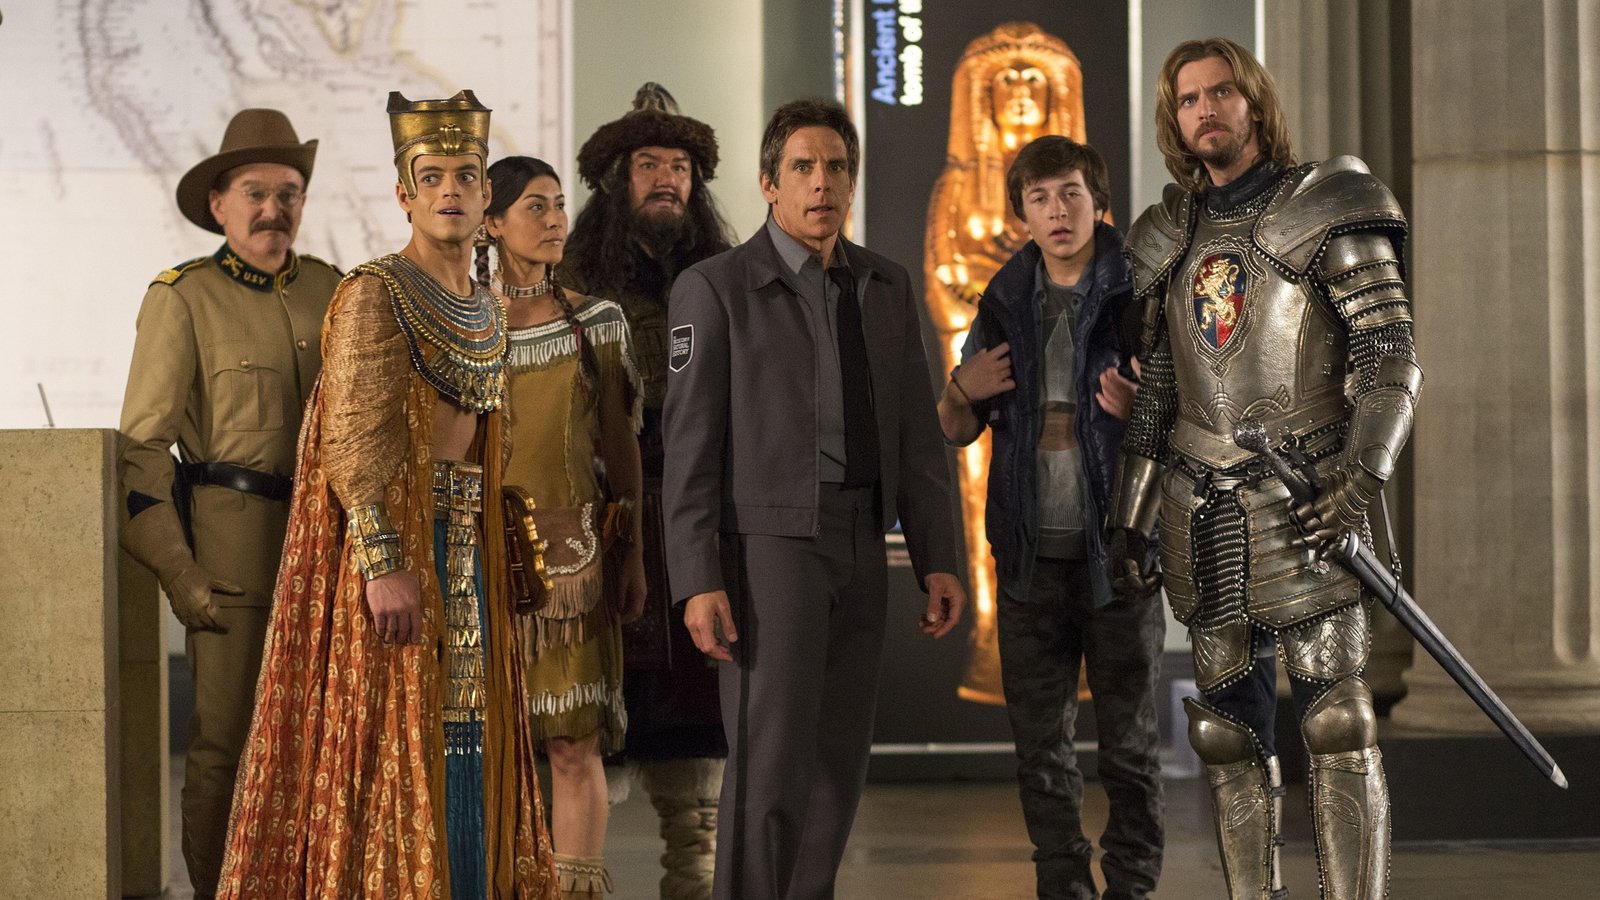 Watch! Night at the Museum featurette